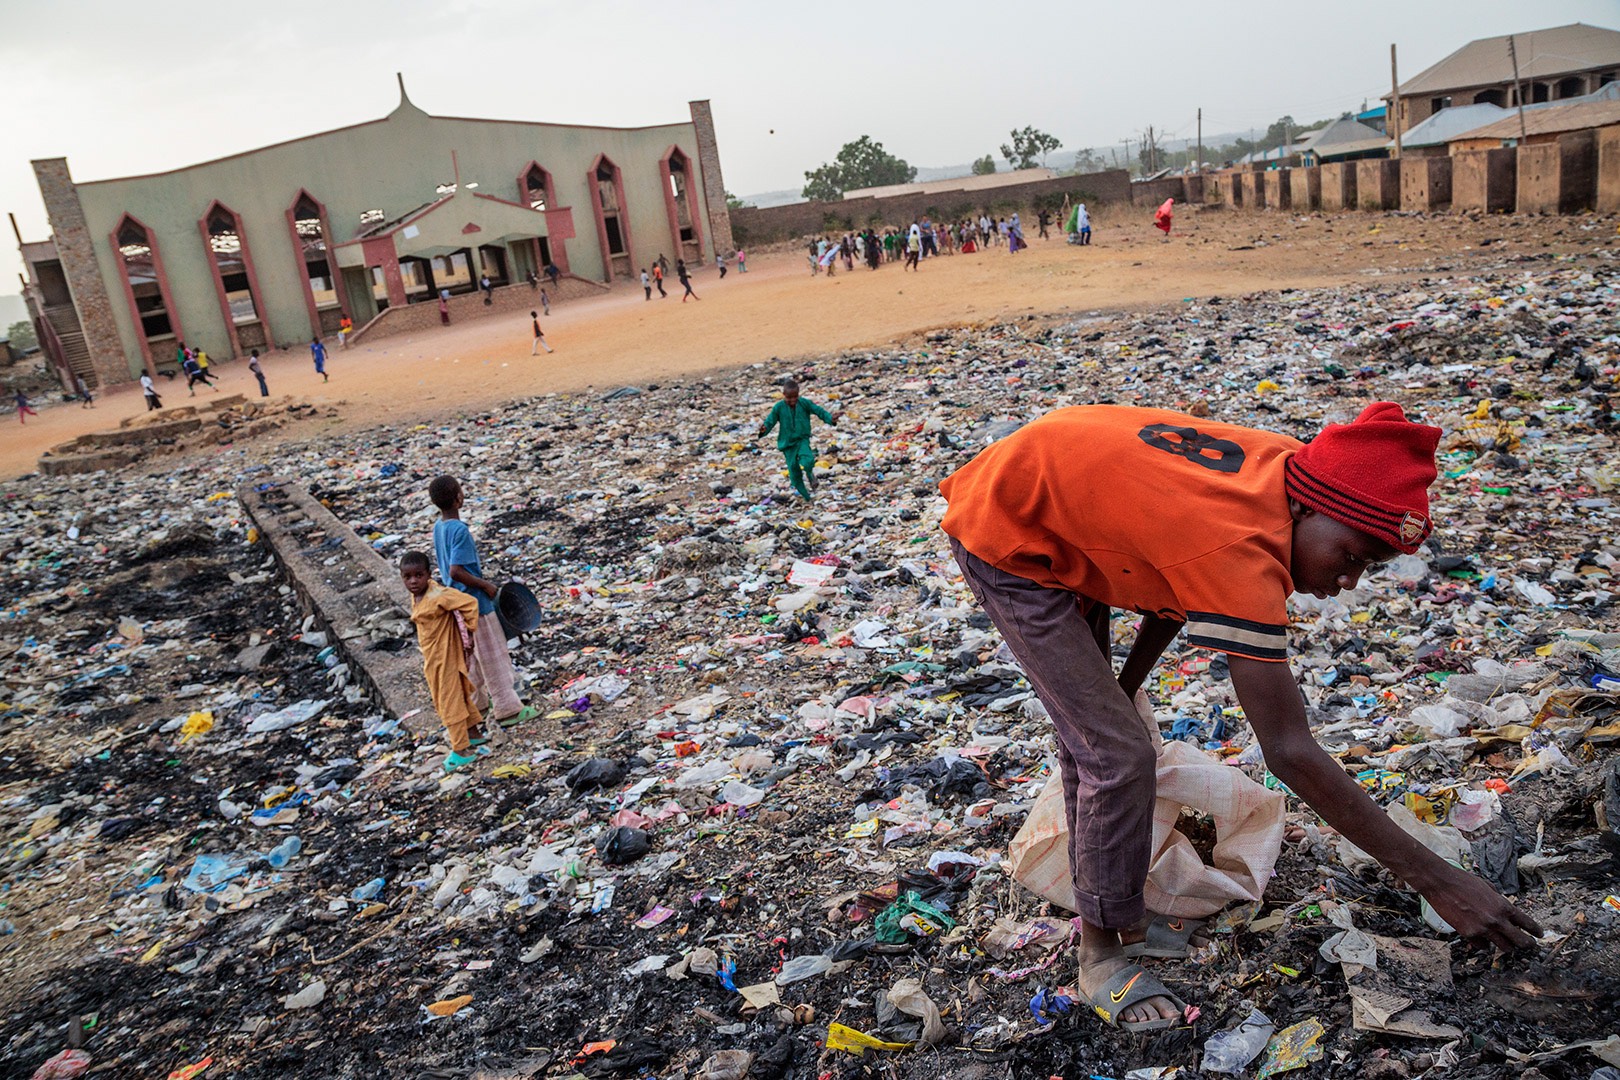 Terrorism as Islamizing Tool: A young Muslim boy picks through garbage in what was once the main Christian church in this community. Due to attacks on the church, the Christians have fled this area. The poverty and lack of development that plagues northern Nigeria and fuels the insurgency is evident in the Muslim section of Angwan Rogo, considered a no go area of Jos, Nigeria on March 25, 2013. | Ed Kashi 